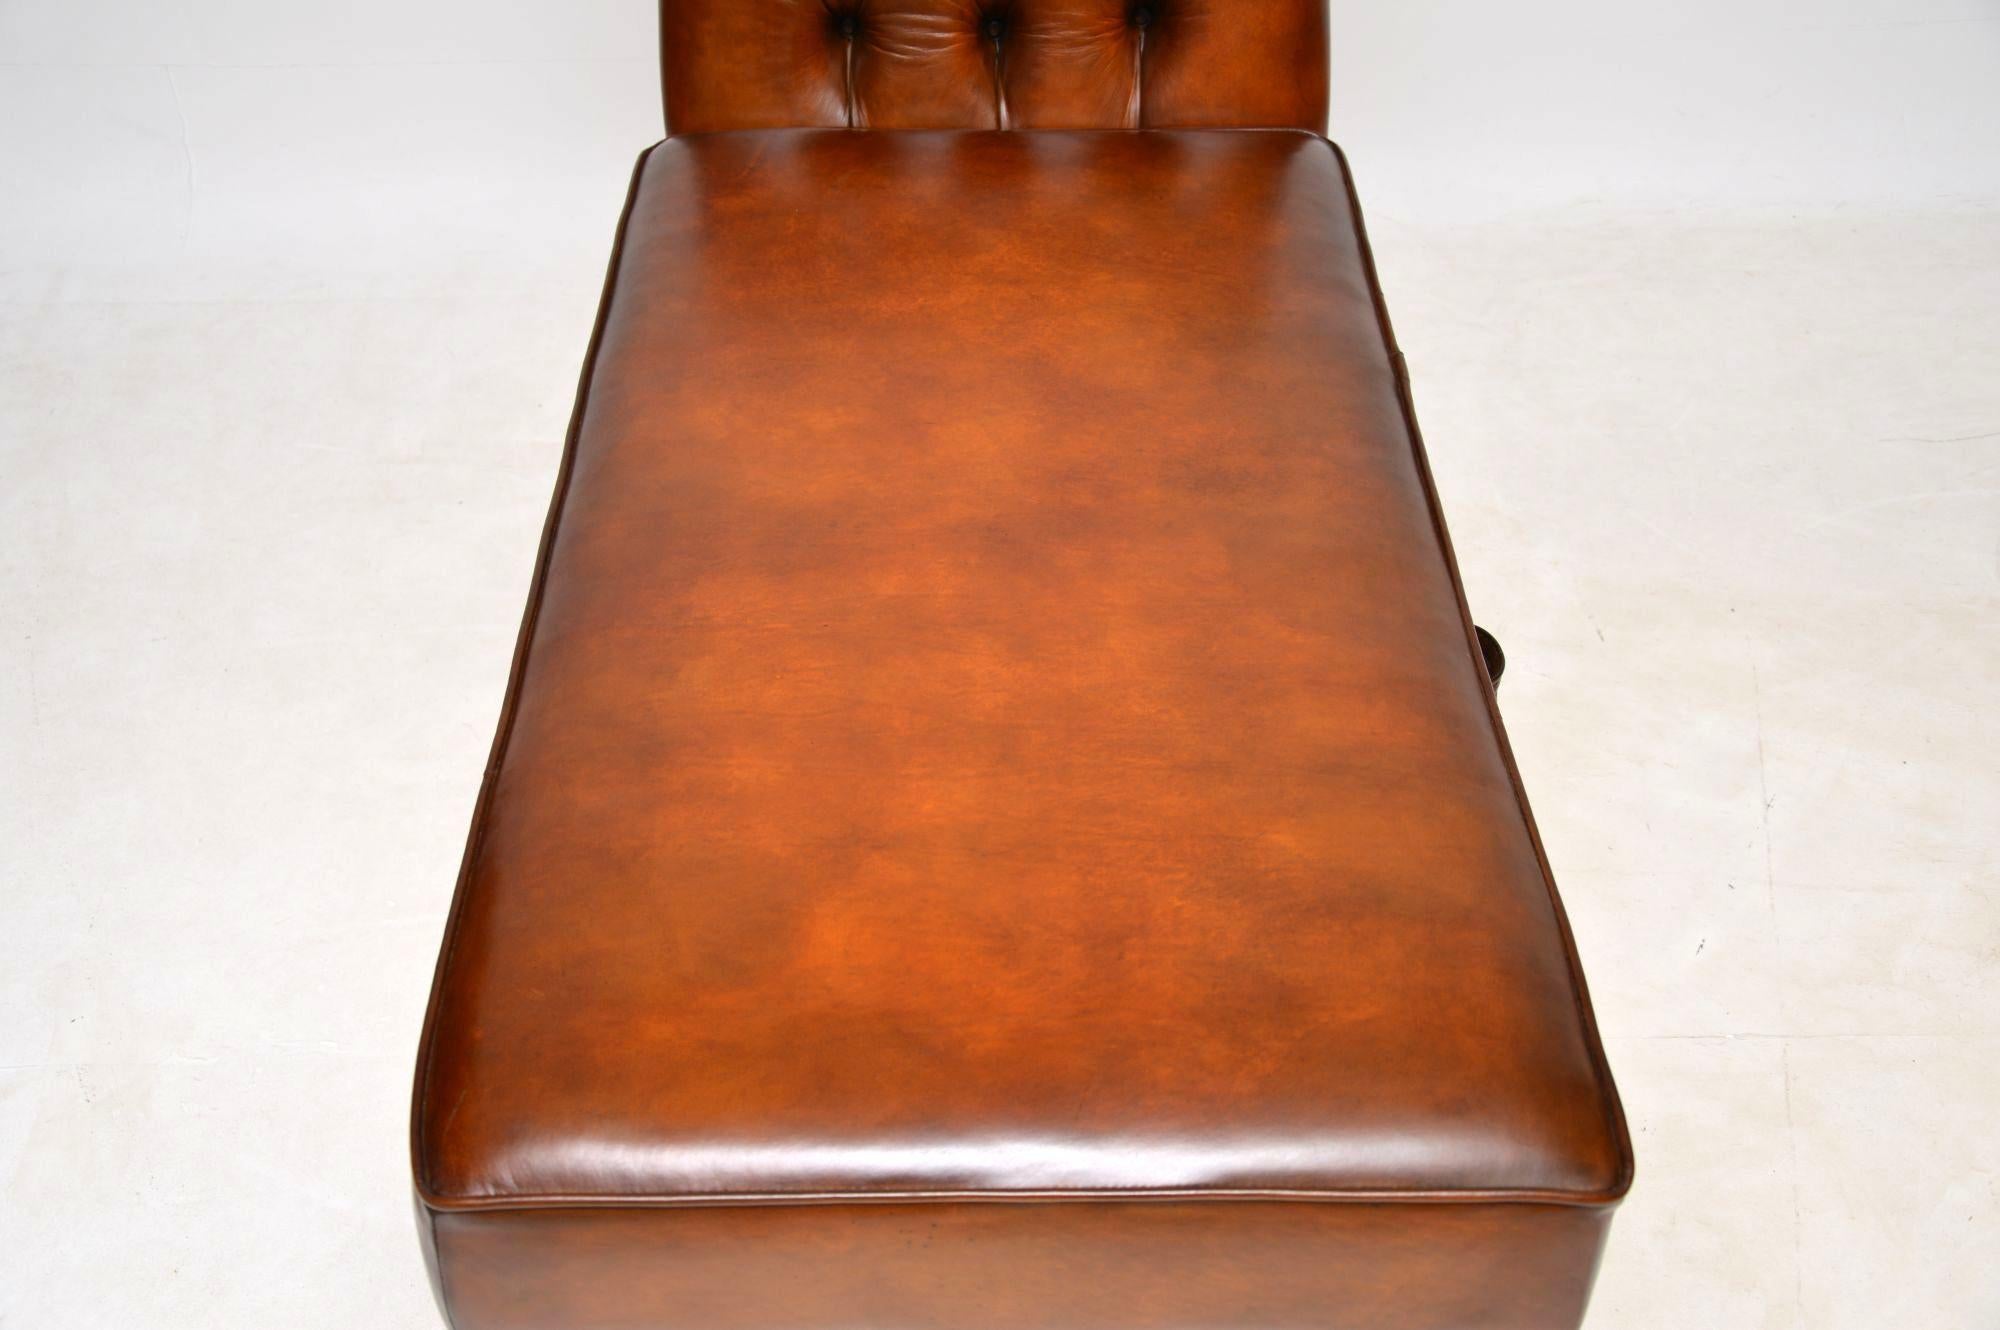  Antique Victorian Leather Chaise Lounge Ottoman 1